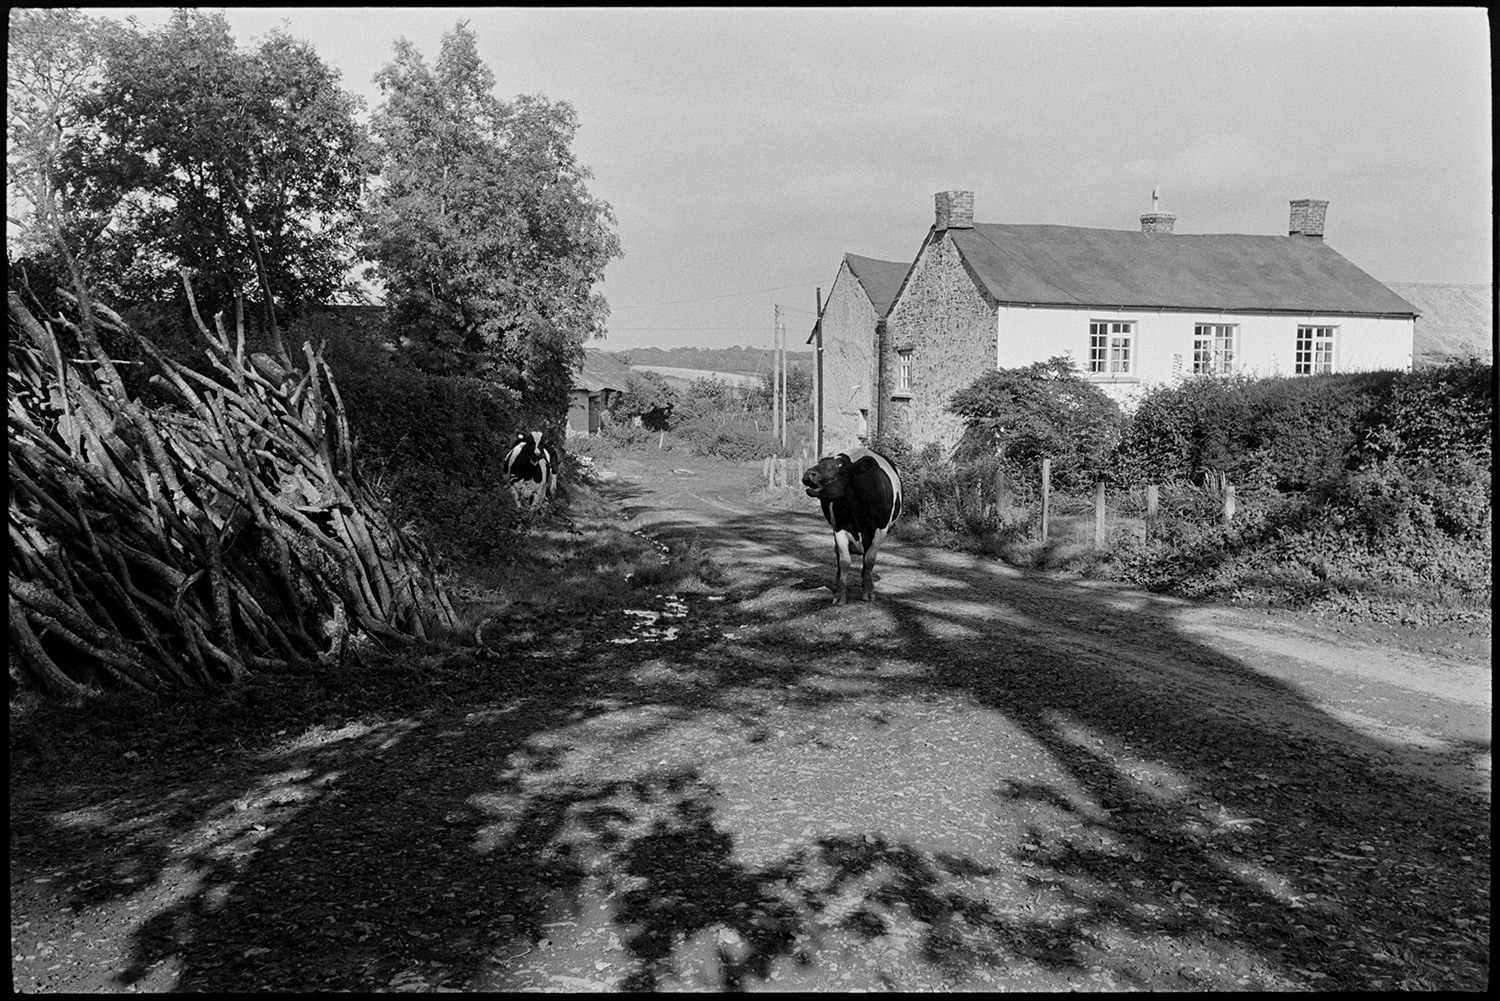 Cows going to be milked past large woodpile. 
[Cows walking along a road on their way to be milked, possibly near Northlew, Beaworthy. They are passing a house and a woodpile on the side of the road. One of the cows is mooing.]